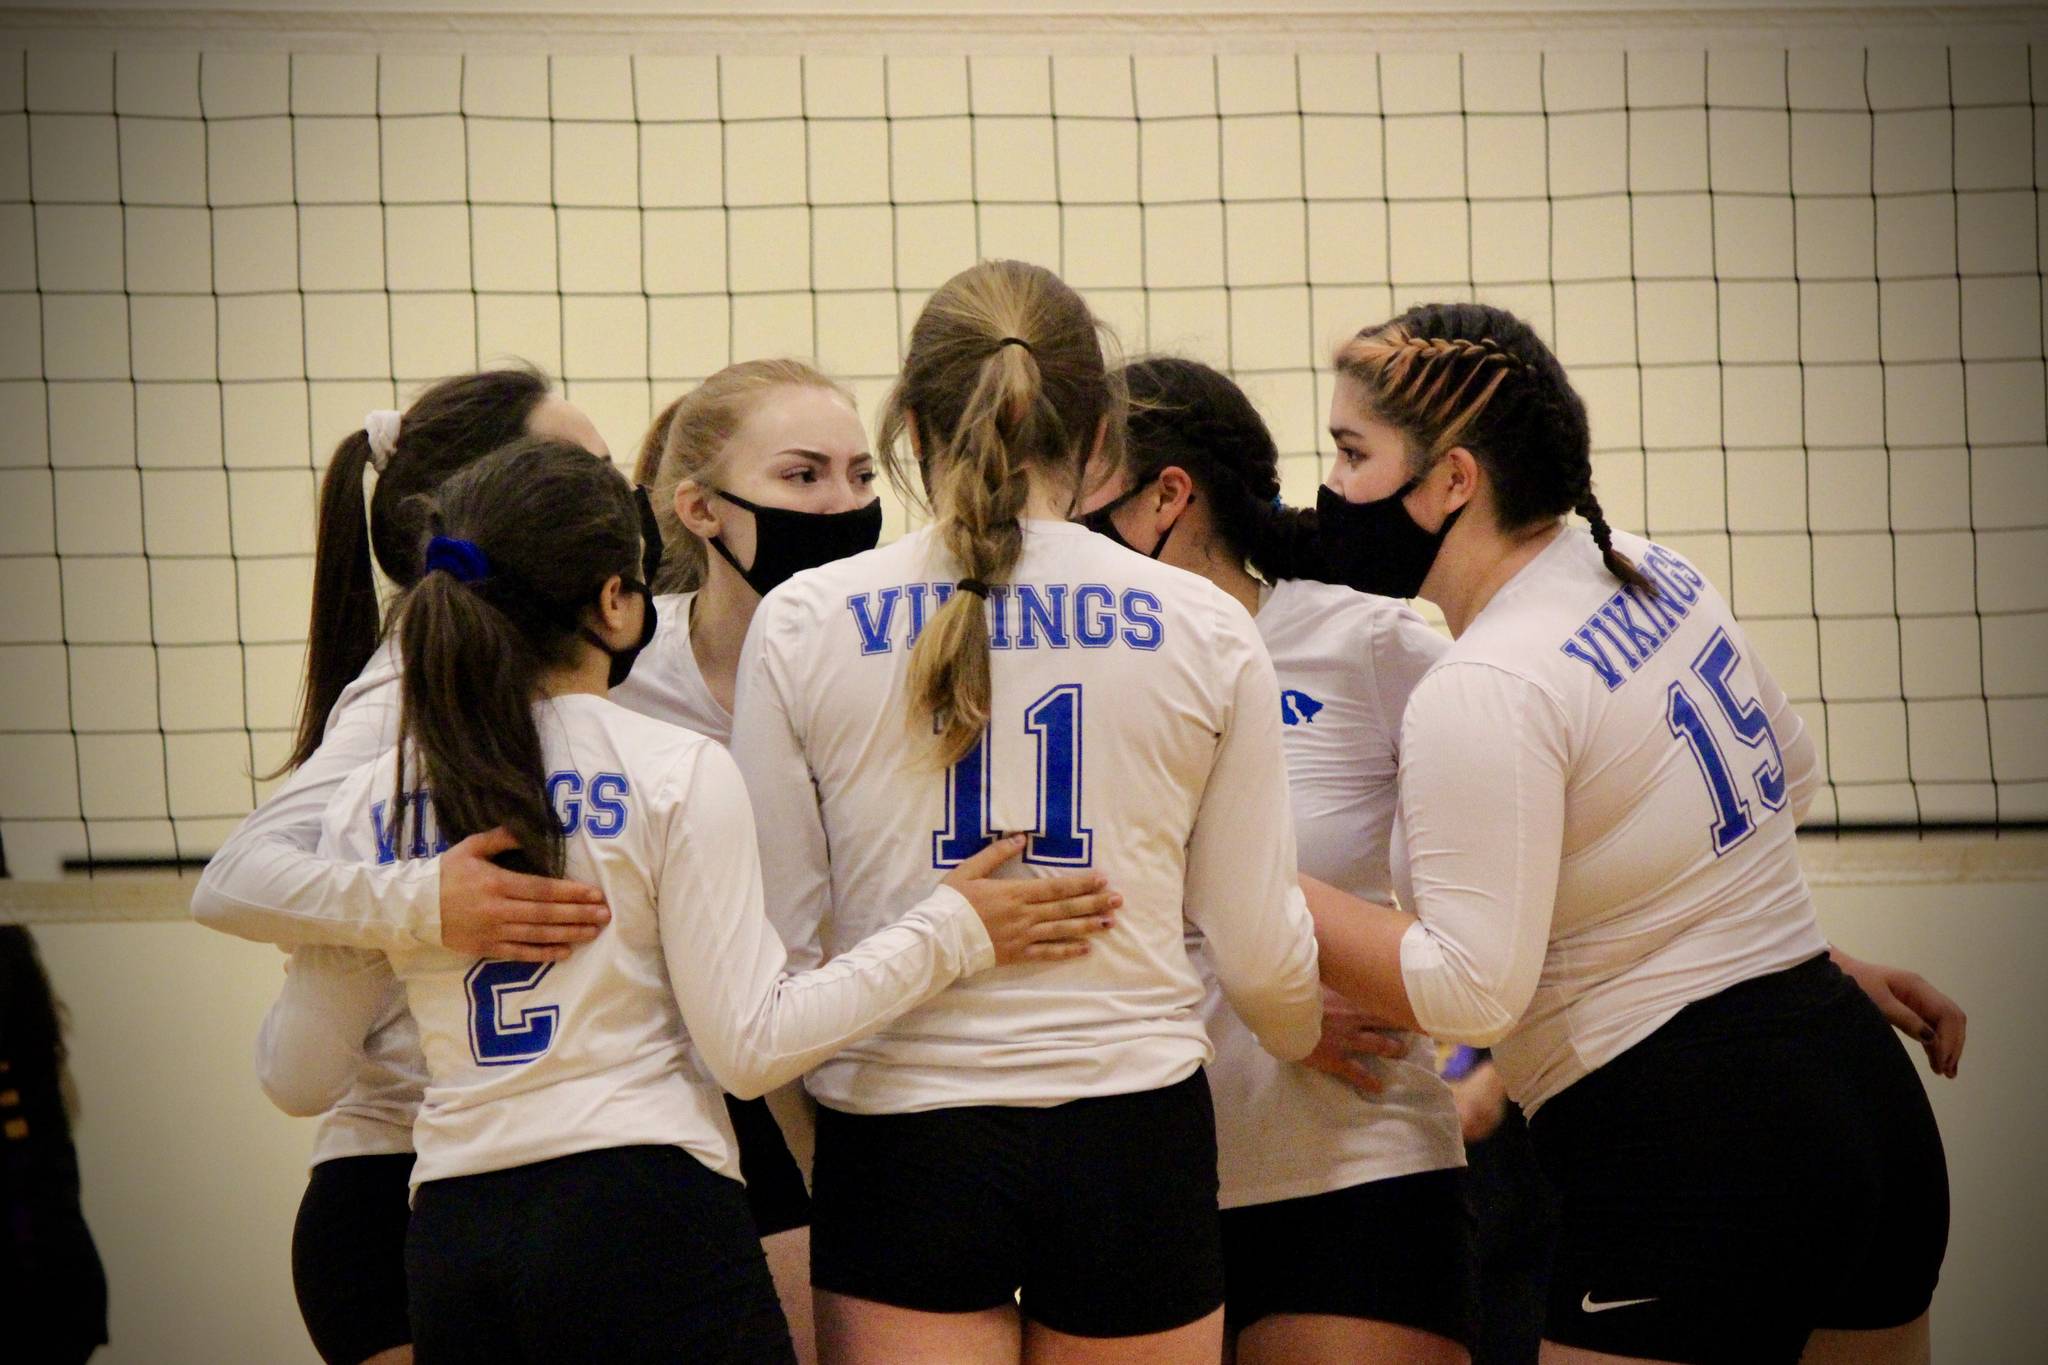 Corey Wiscomb photo
The Lady Vikings volleyball team in a huddle.